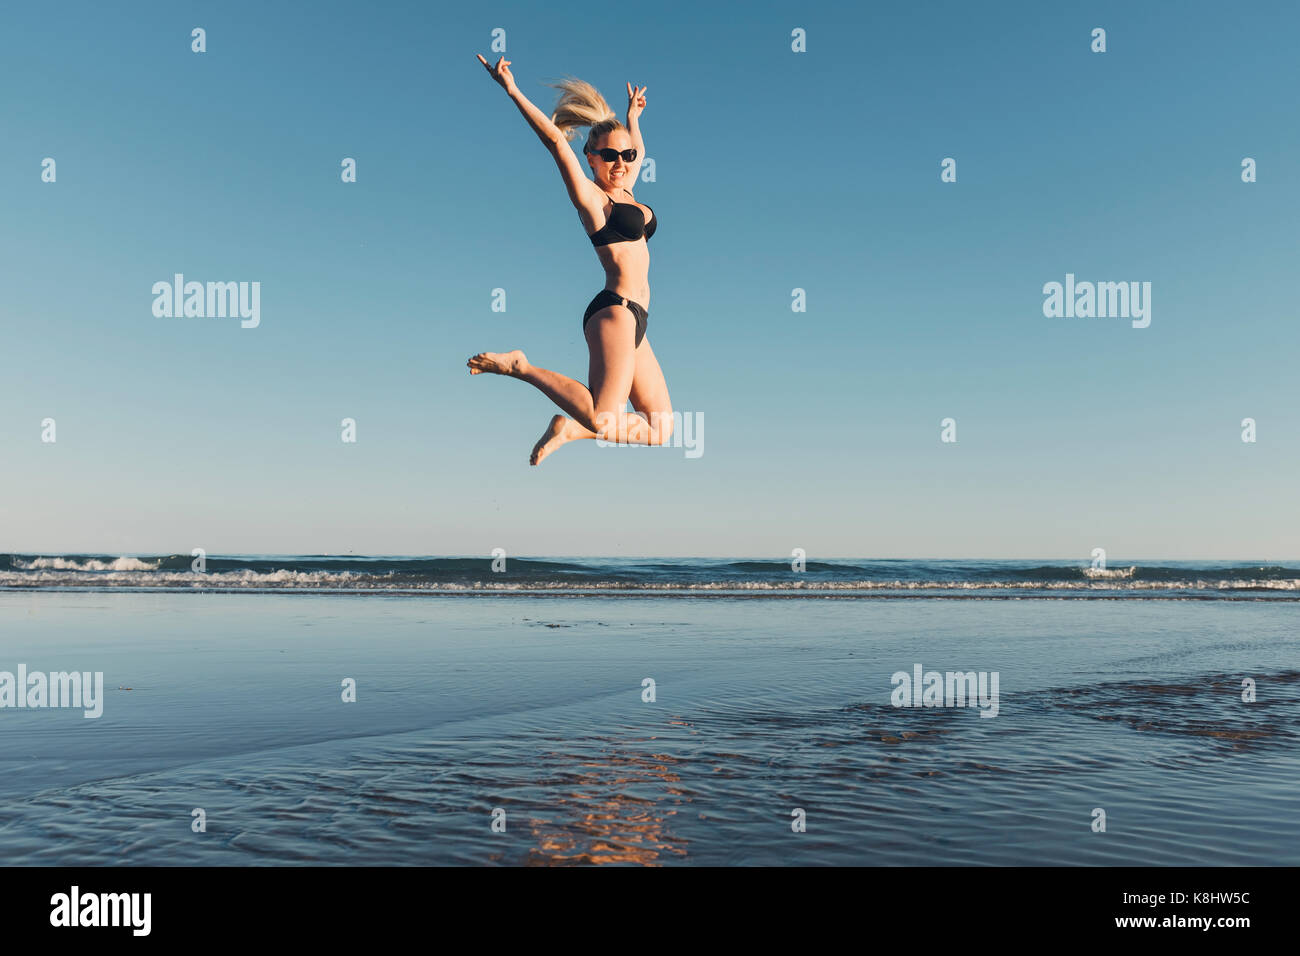 Carefree woman jumping at beach against clear sky Banque D'Images